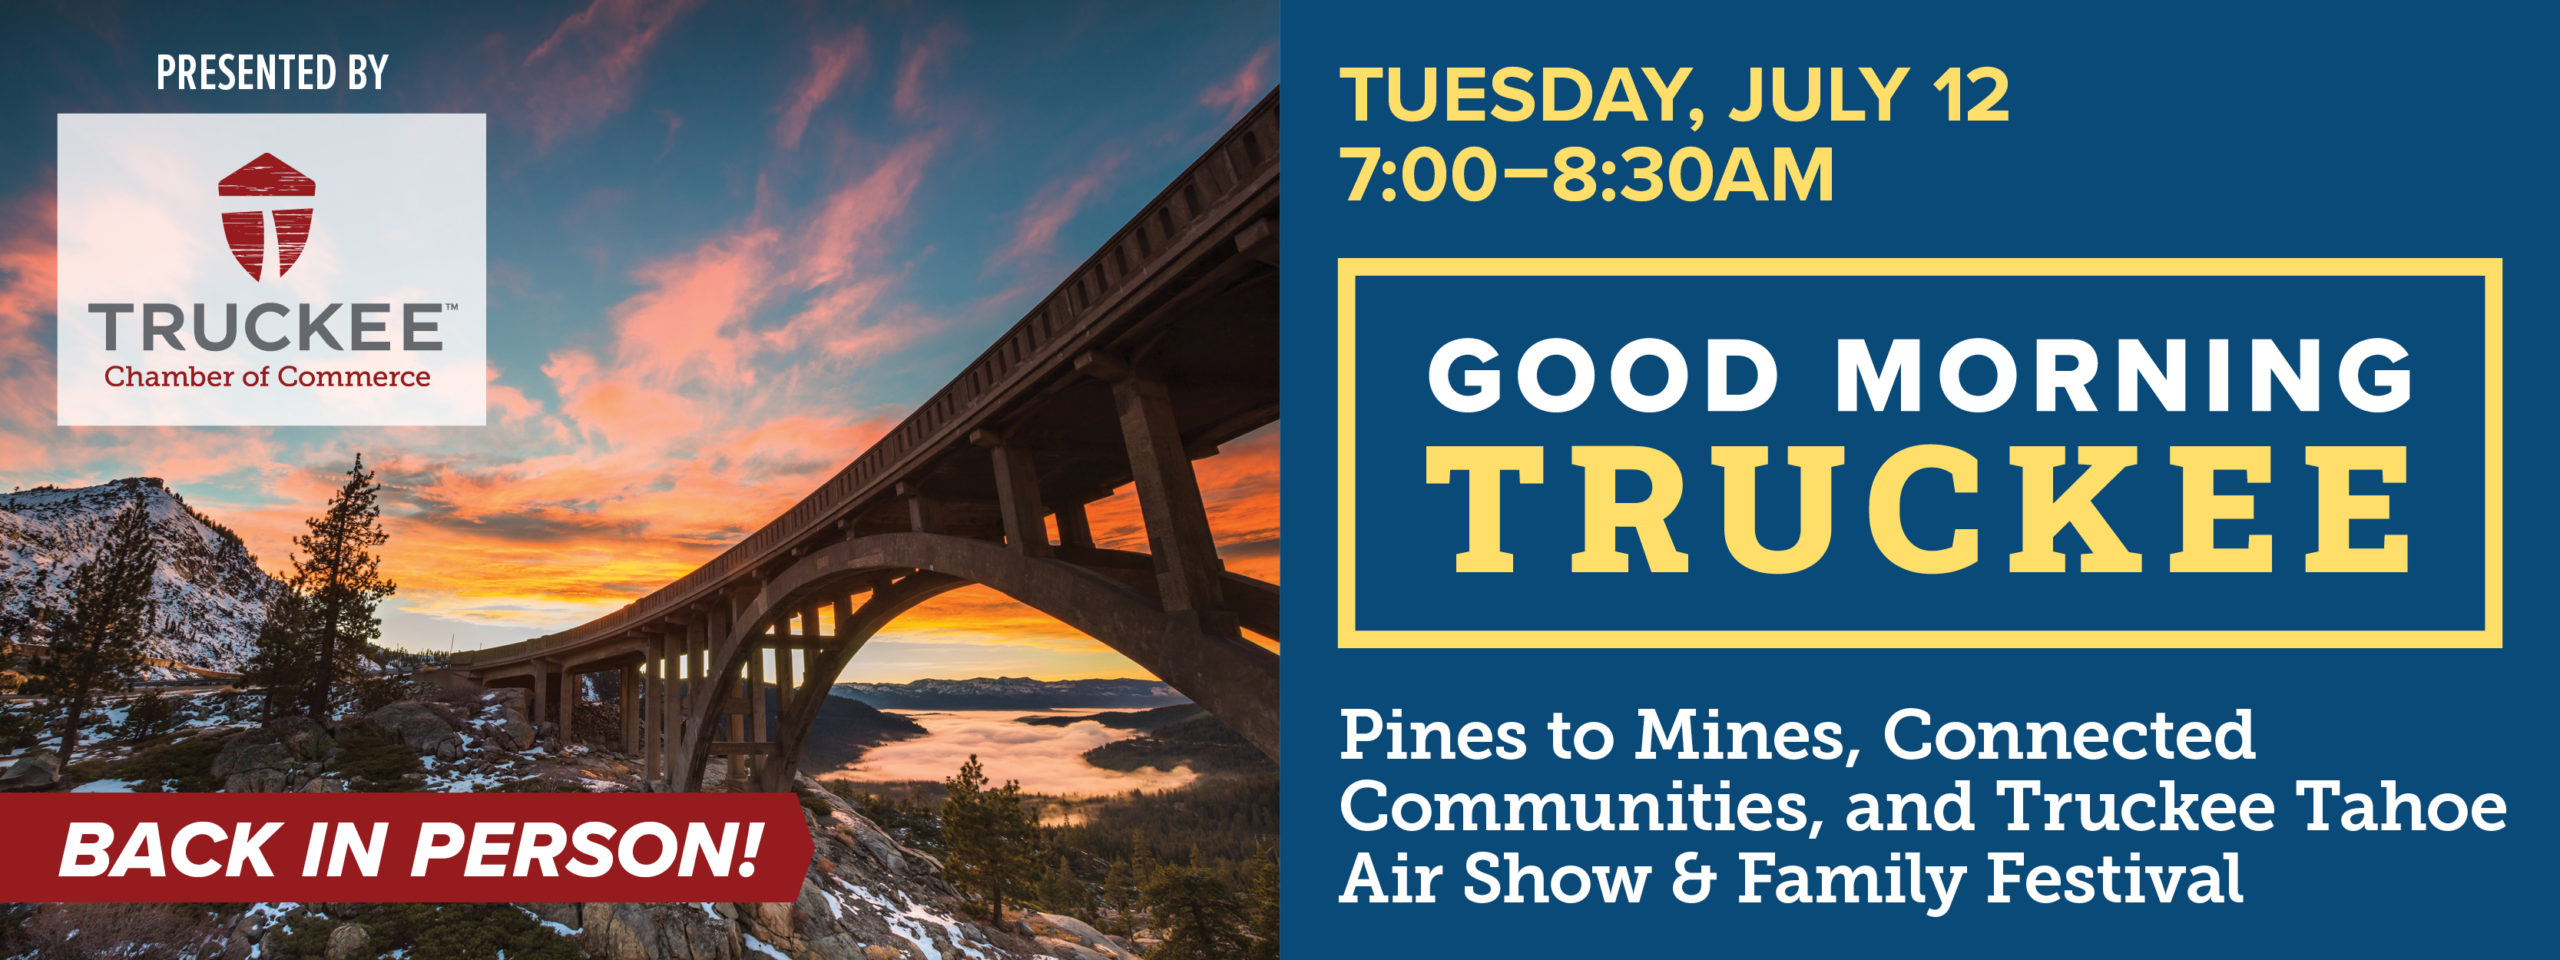 July 12, 2022 Good Morning Truckee: Trail Projects and Truckee Tahoe Air Show & Family Festival